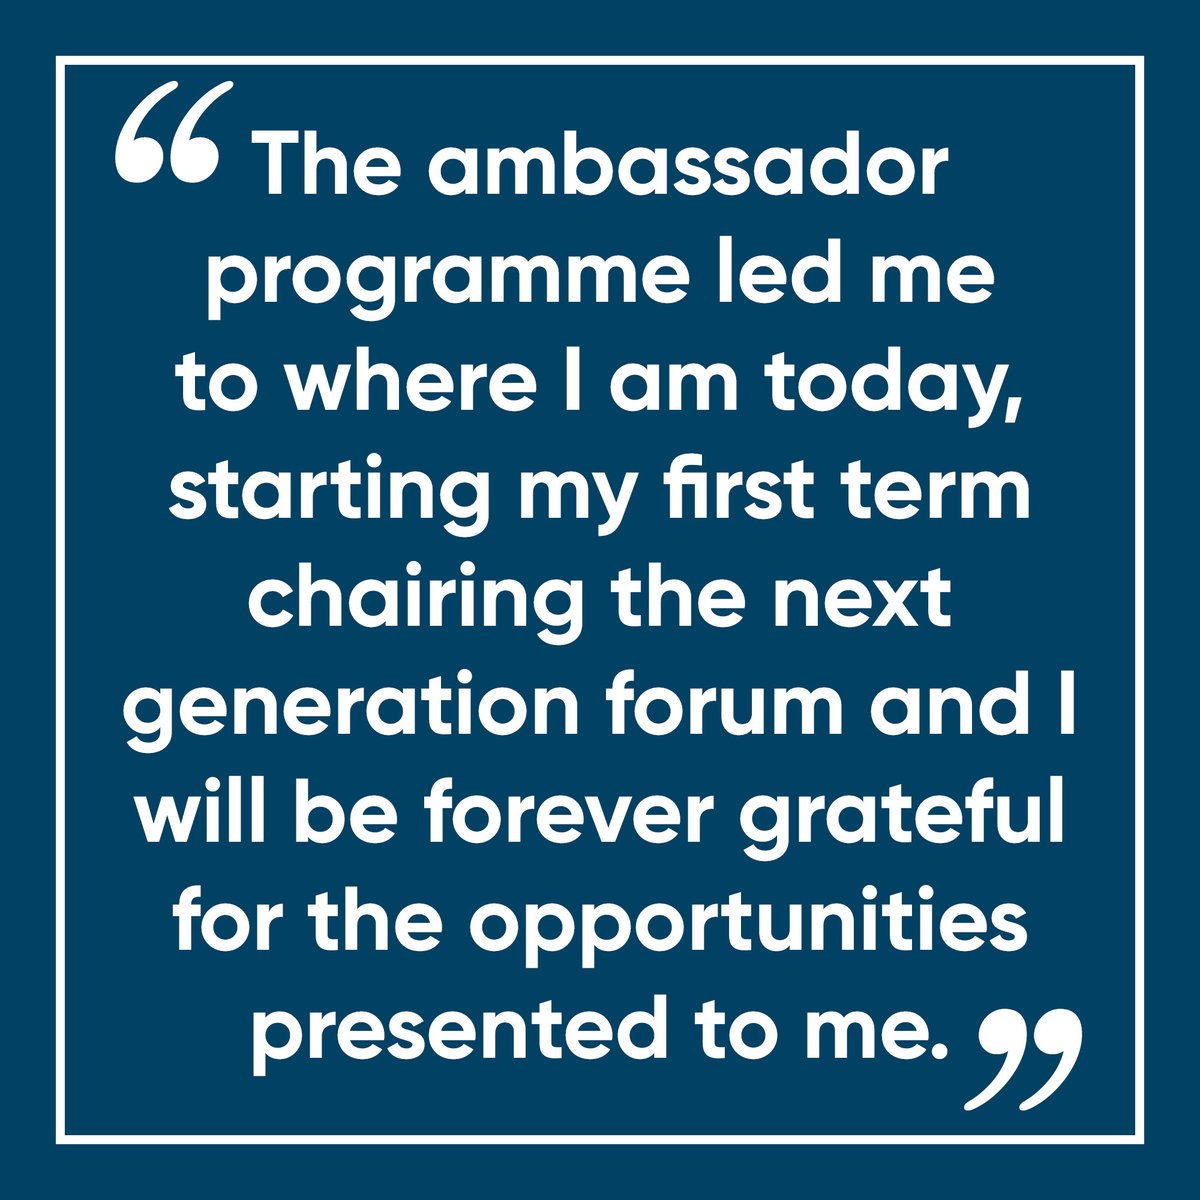 From S&YF Ambassador to Chair of the NFU Next Gen Forum, @farmerevees's involvement with the NFU continues to grow! Apply to the 2023 programme at nfuonline.com/ambassadors or follow the link in our bio #ambassador #ambassadors #youngambassador #farmingambassador #nextgeneration